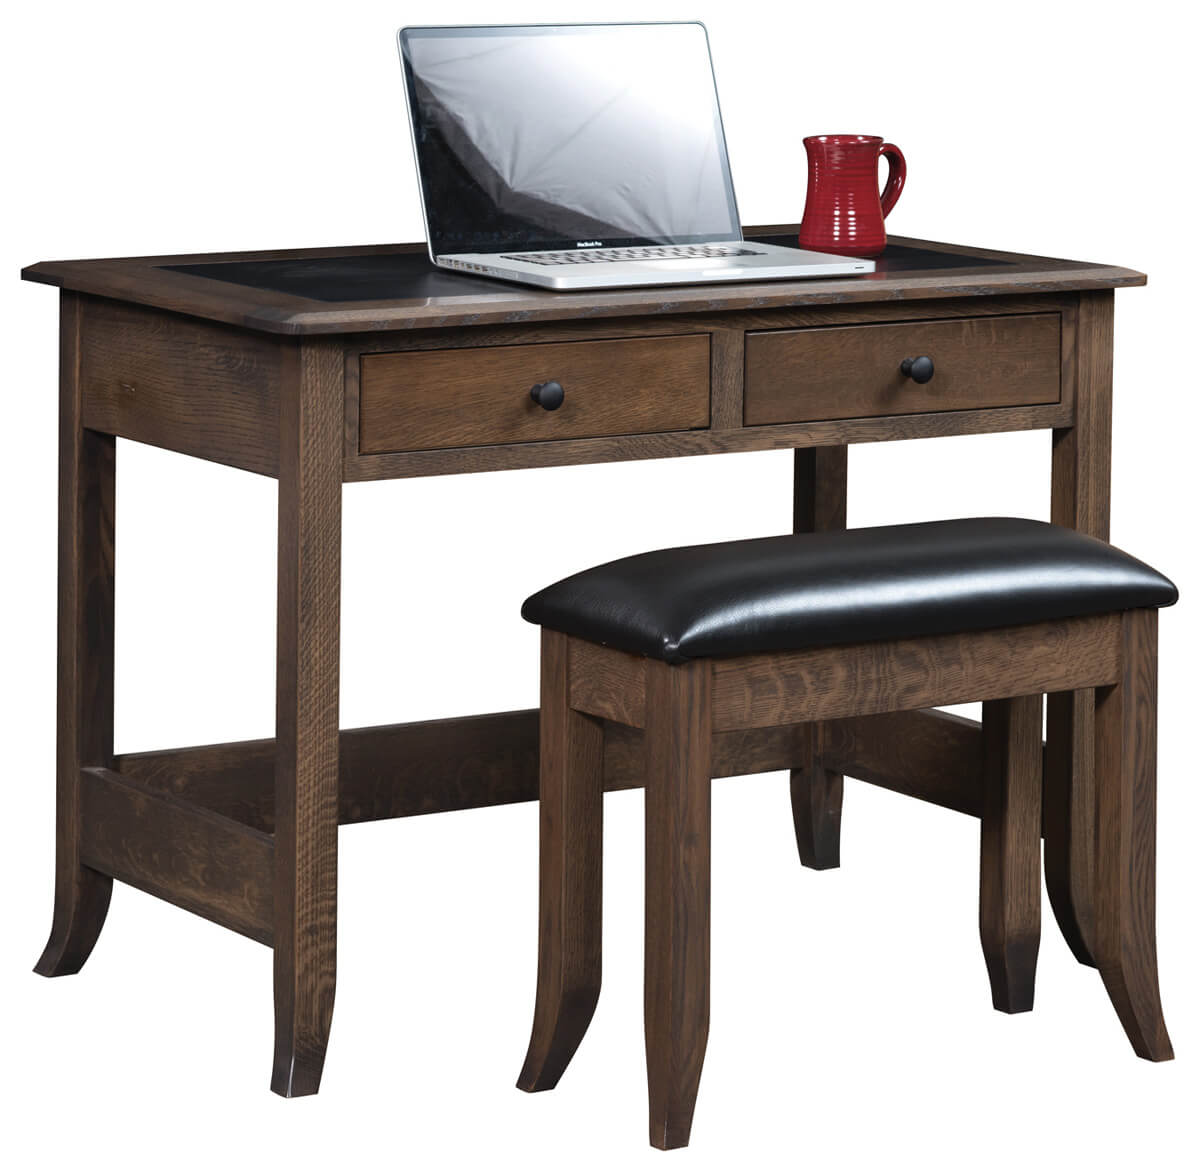 Read more about the article BUNKER HILL WRITING DESK AND BENCH